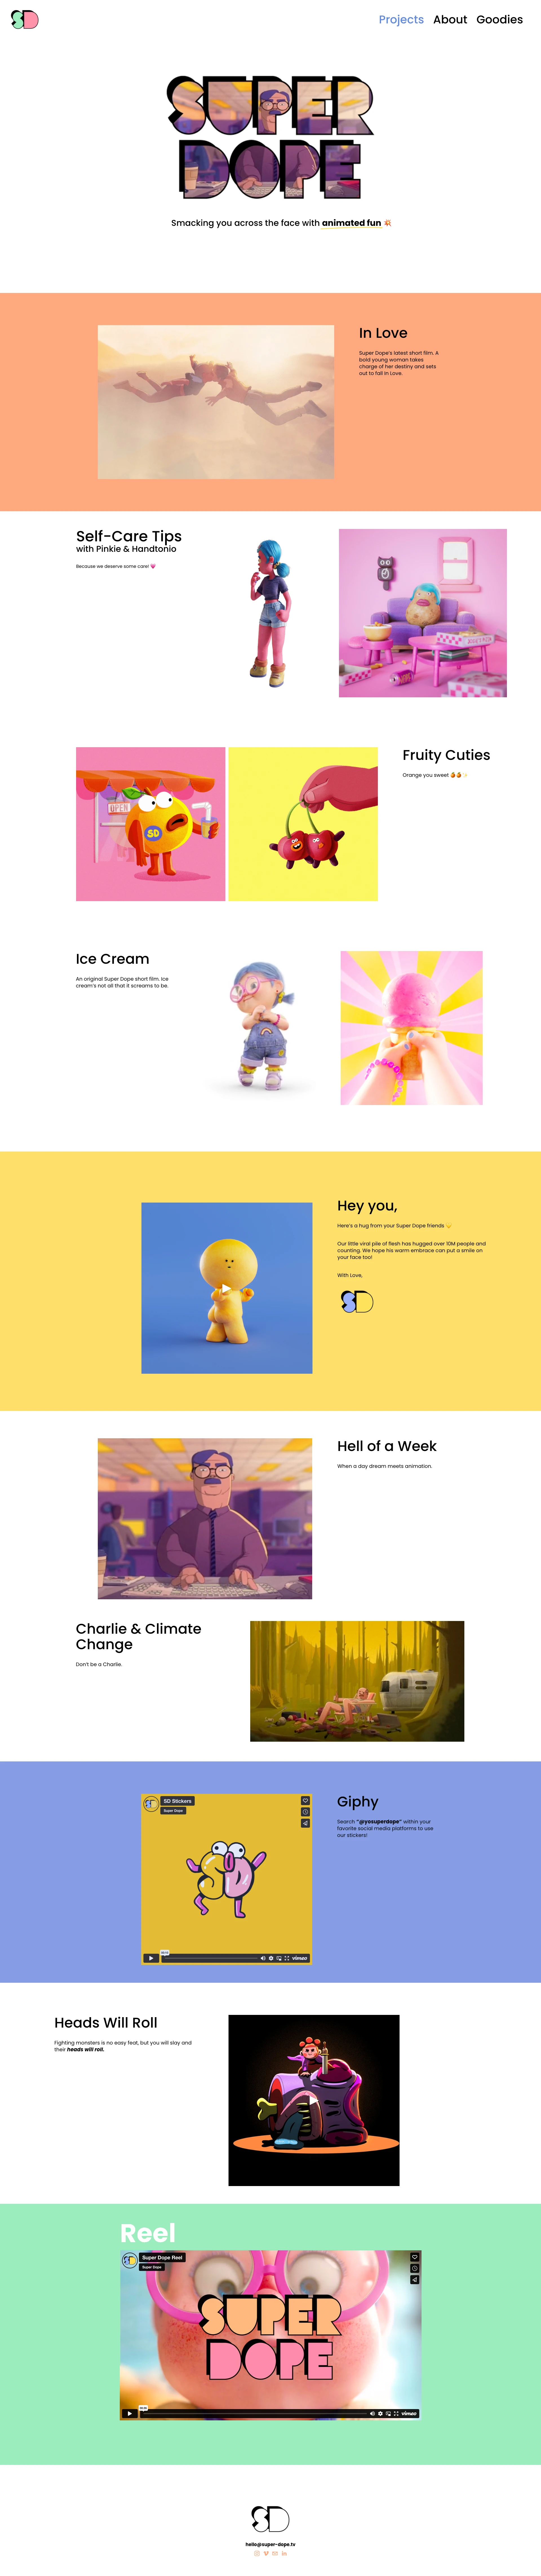 Super Dope Landing Page Example: Smacking you across the face with animated fun. Bring your vision to life with Super Dope's creative animation solutions. Our team of experts combines innovation, technical expertise, and creativity to produce animations that educate, inform, and inspire.